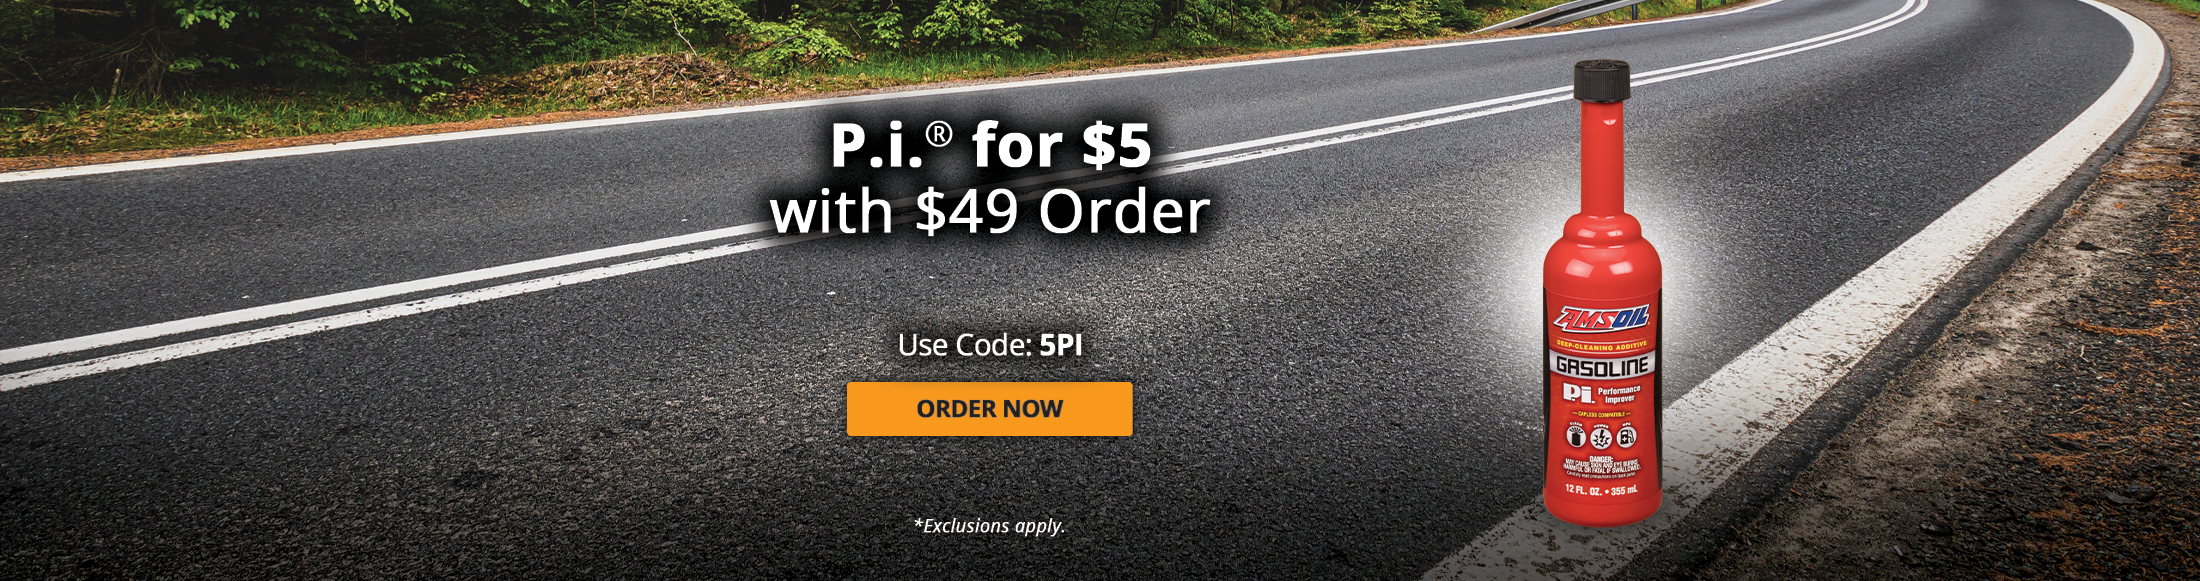 P.i.® for $5 with $49 Order. Use Code: 5PI. Order Now. *Exclusions apply.